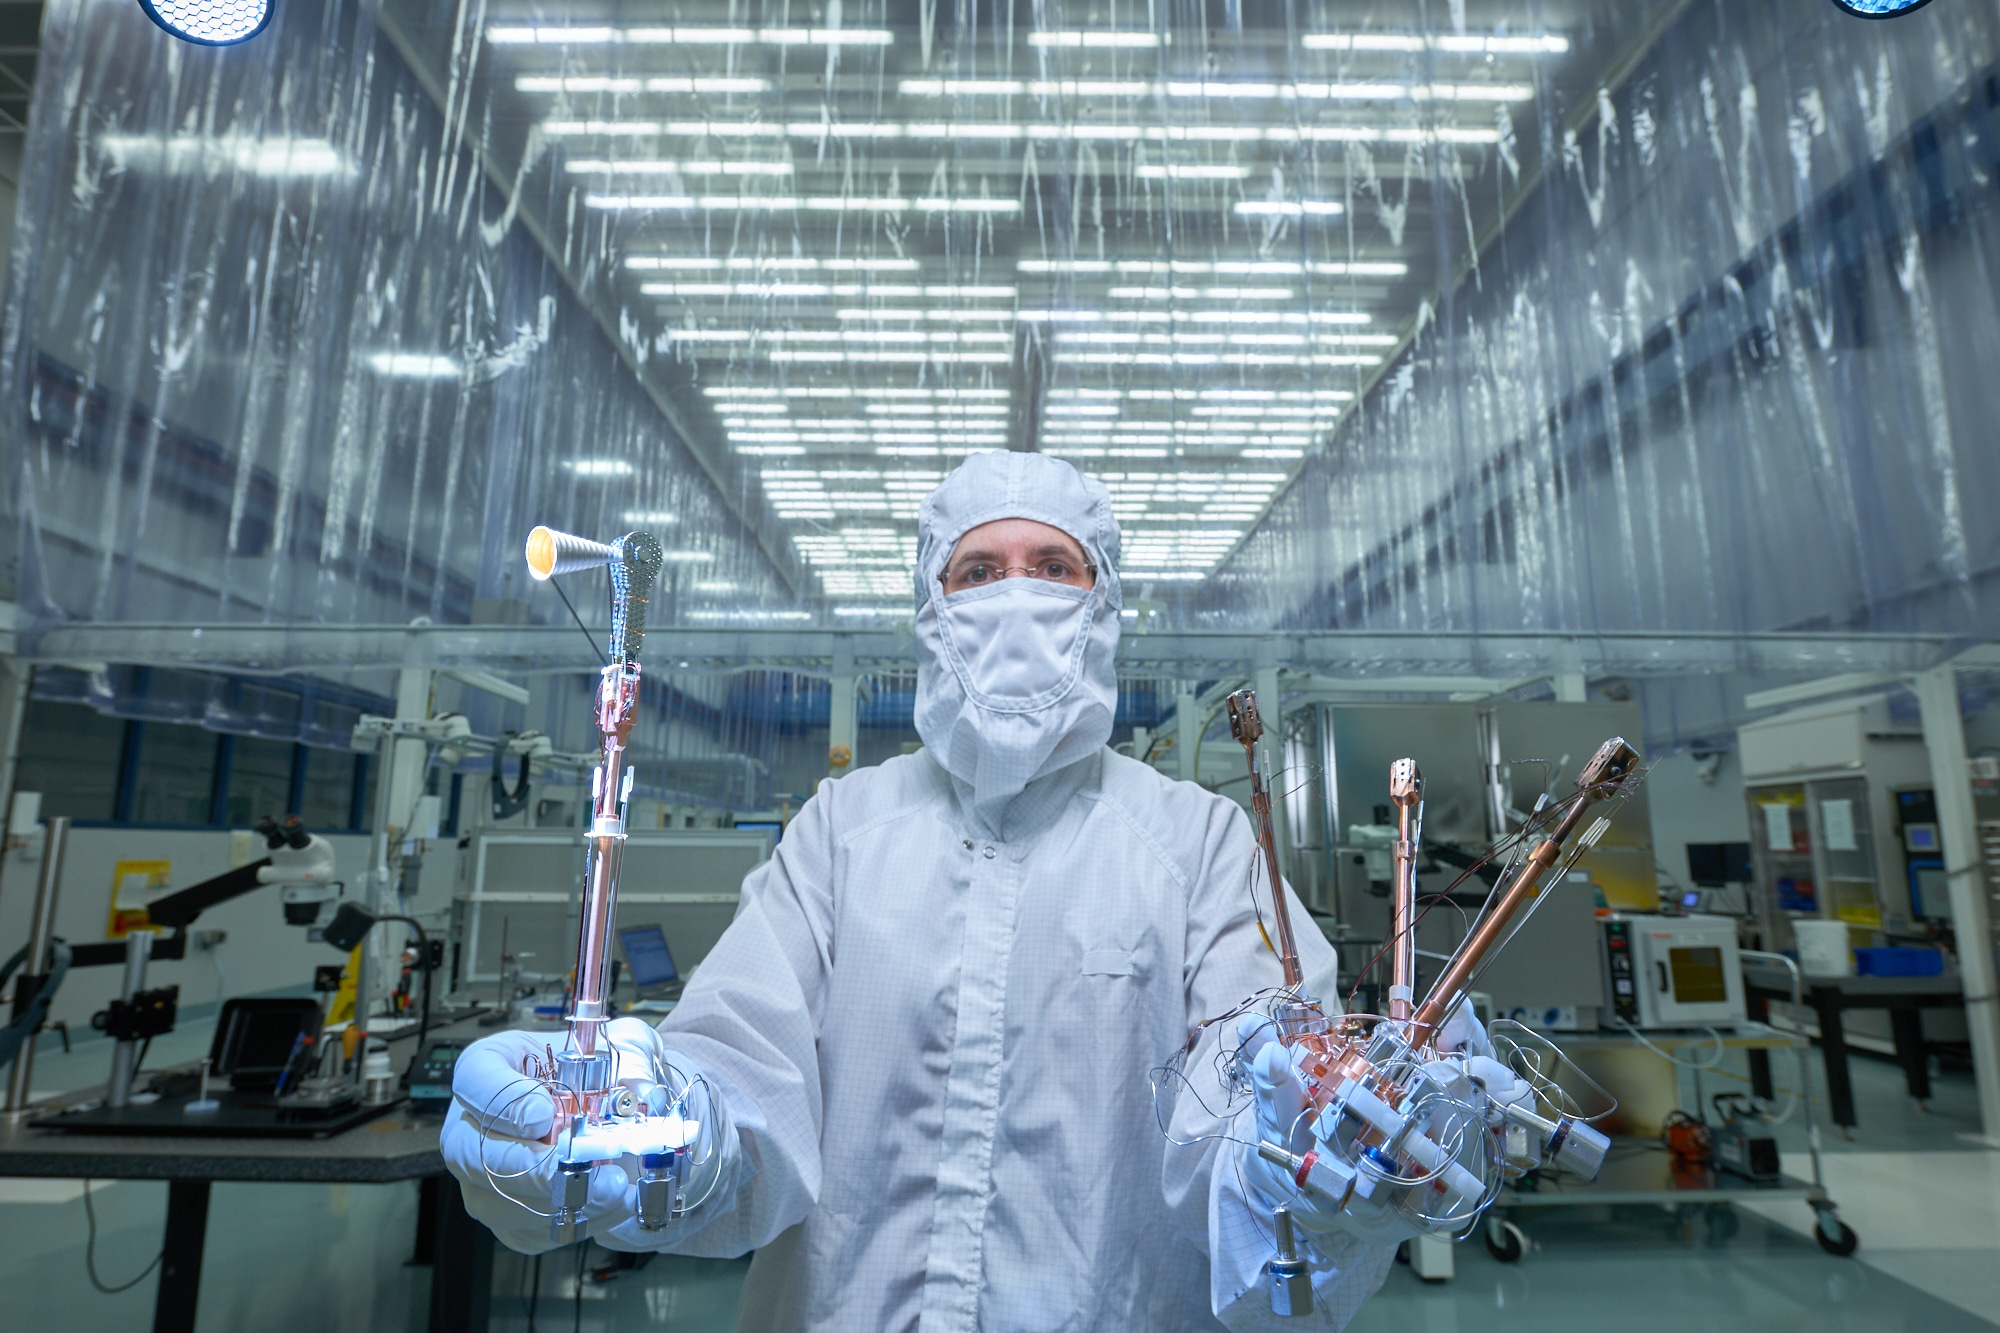 Scientist with timing targets at NIF (Nuclear Ignition Facility) for work in laser-based nuclear fusion.